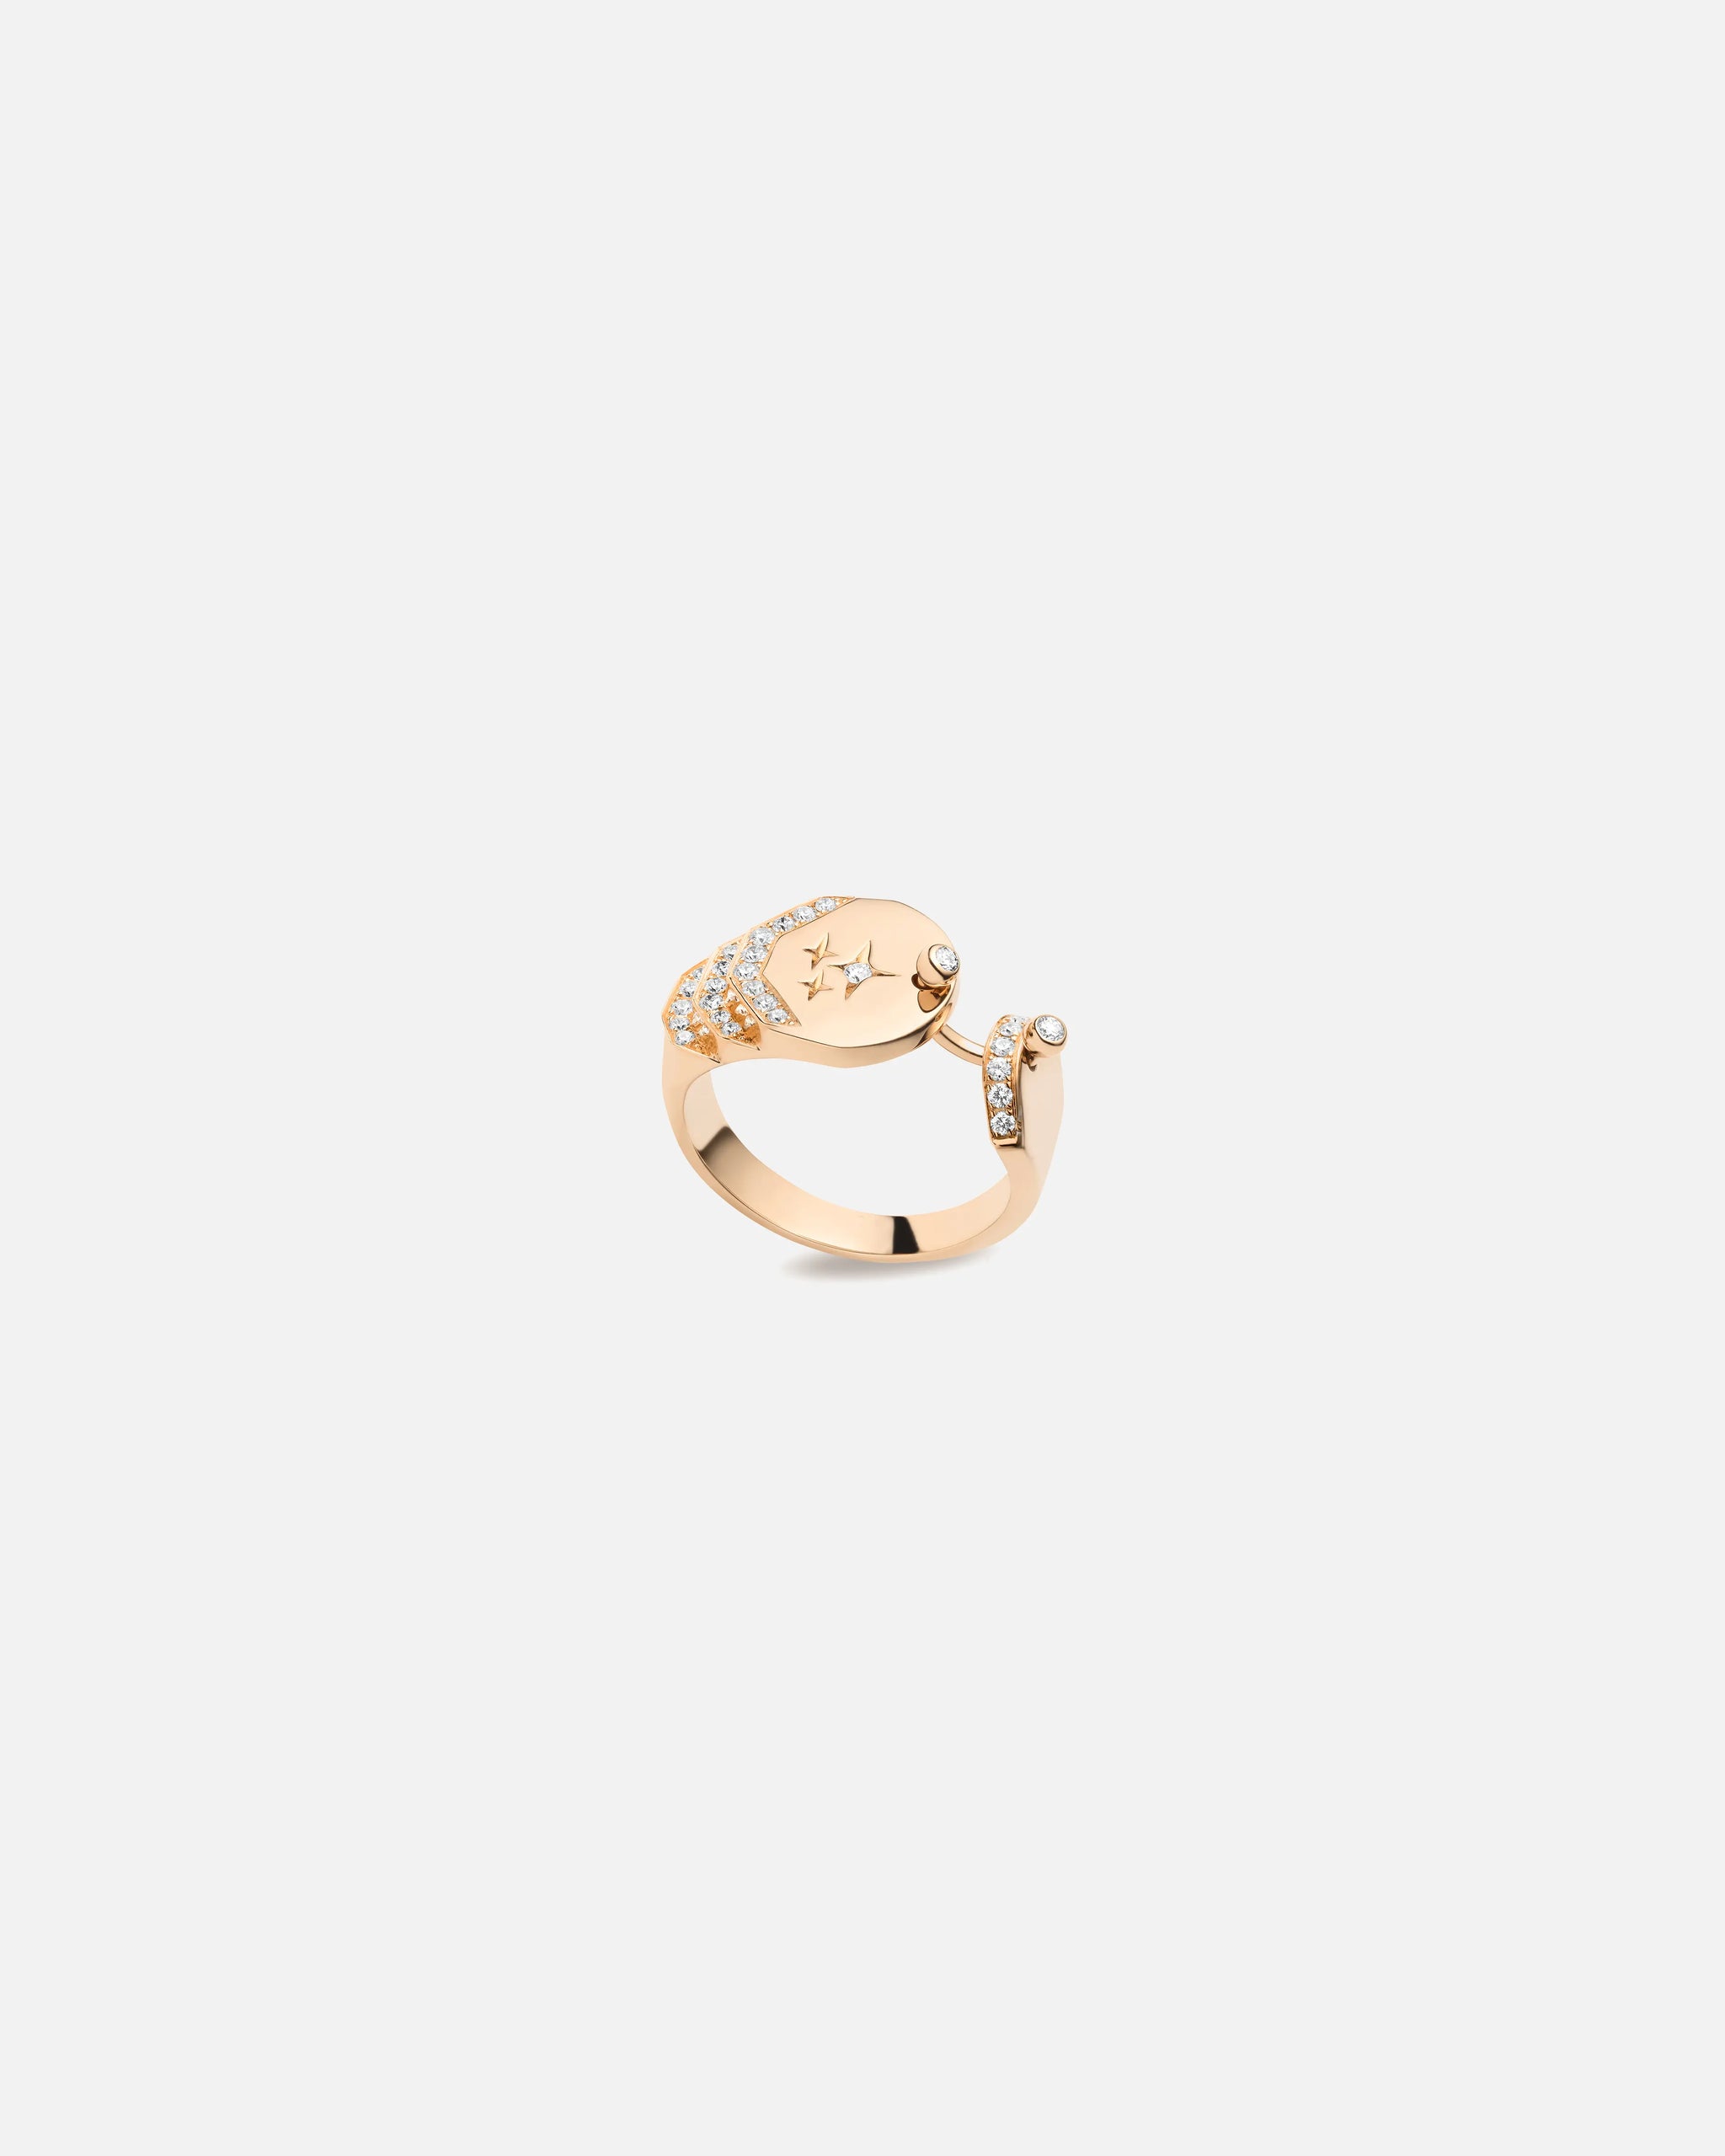 Diamond Mood Sparkles Ring in Rose Gold - Nouvel Heritage - Nouvel Heritage